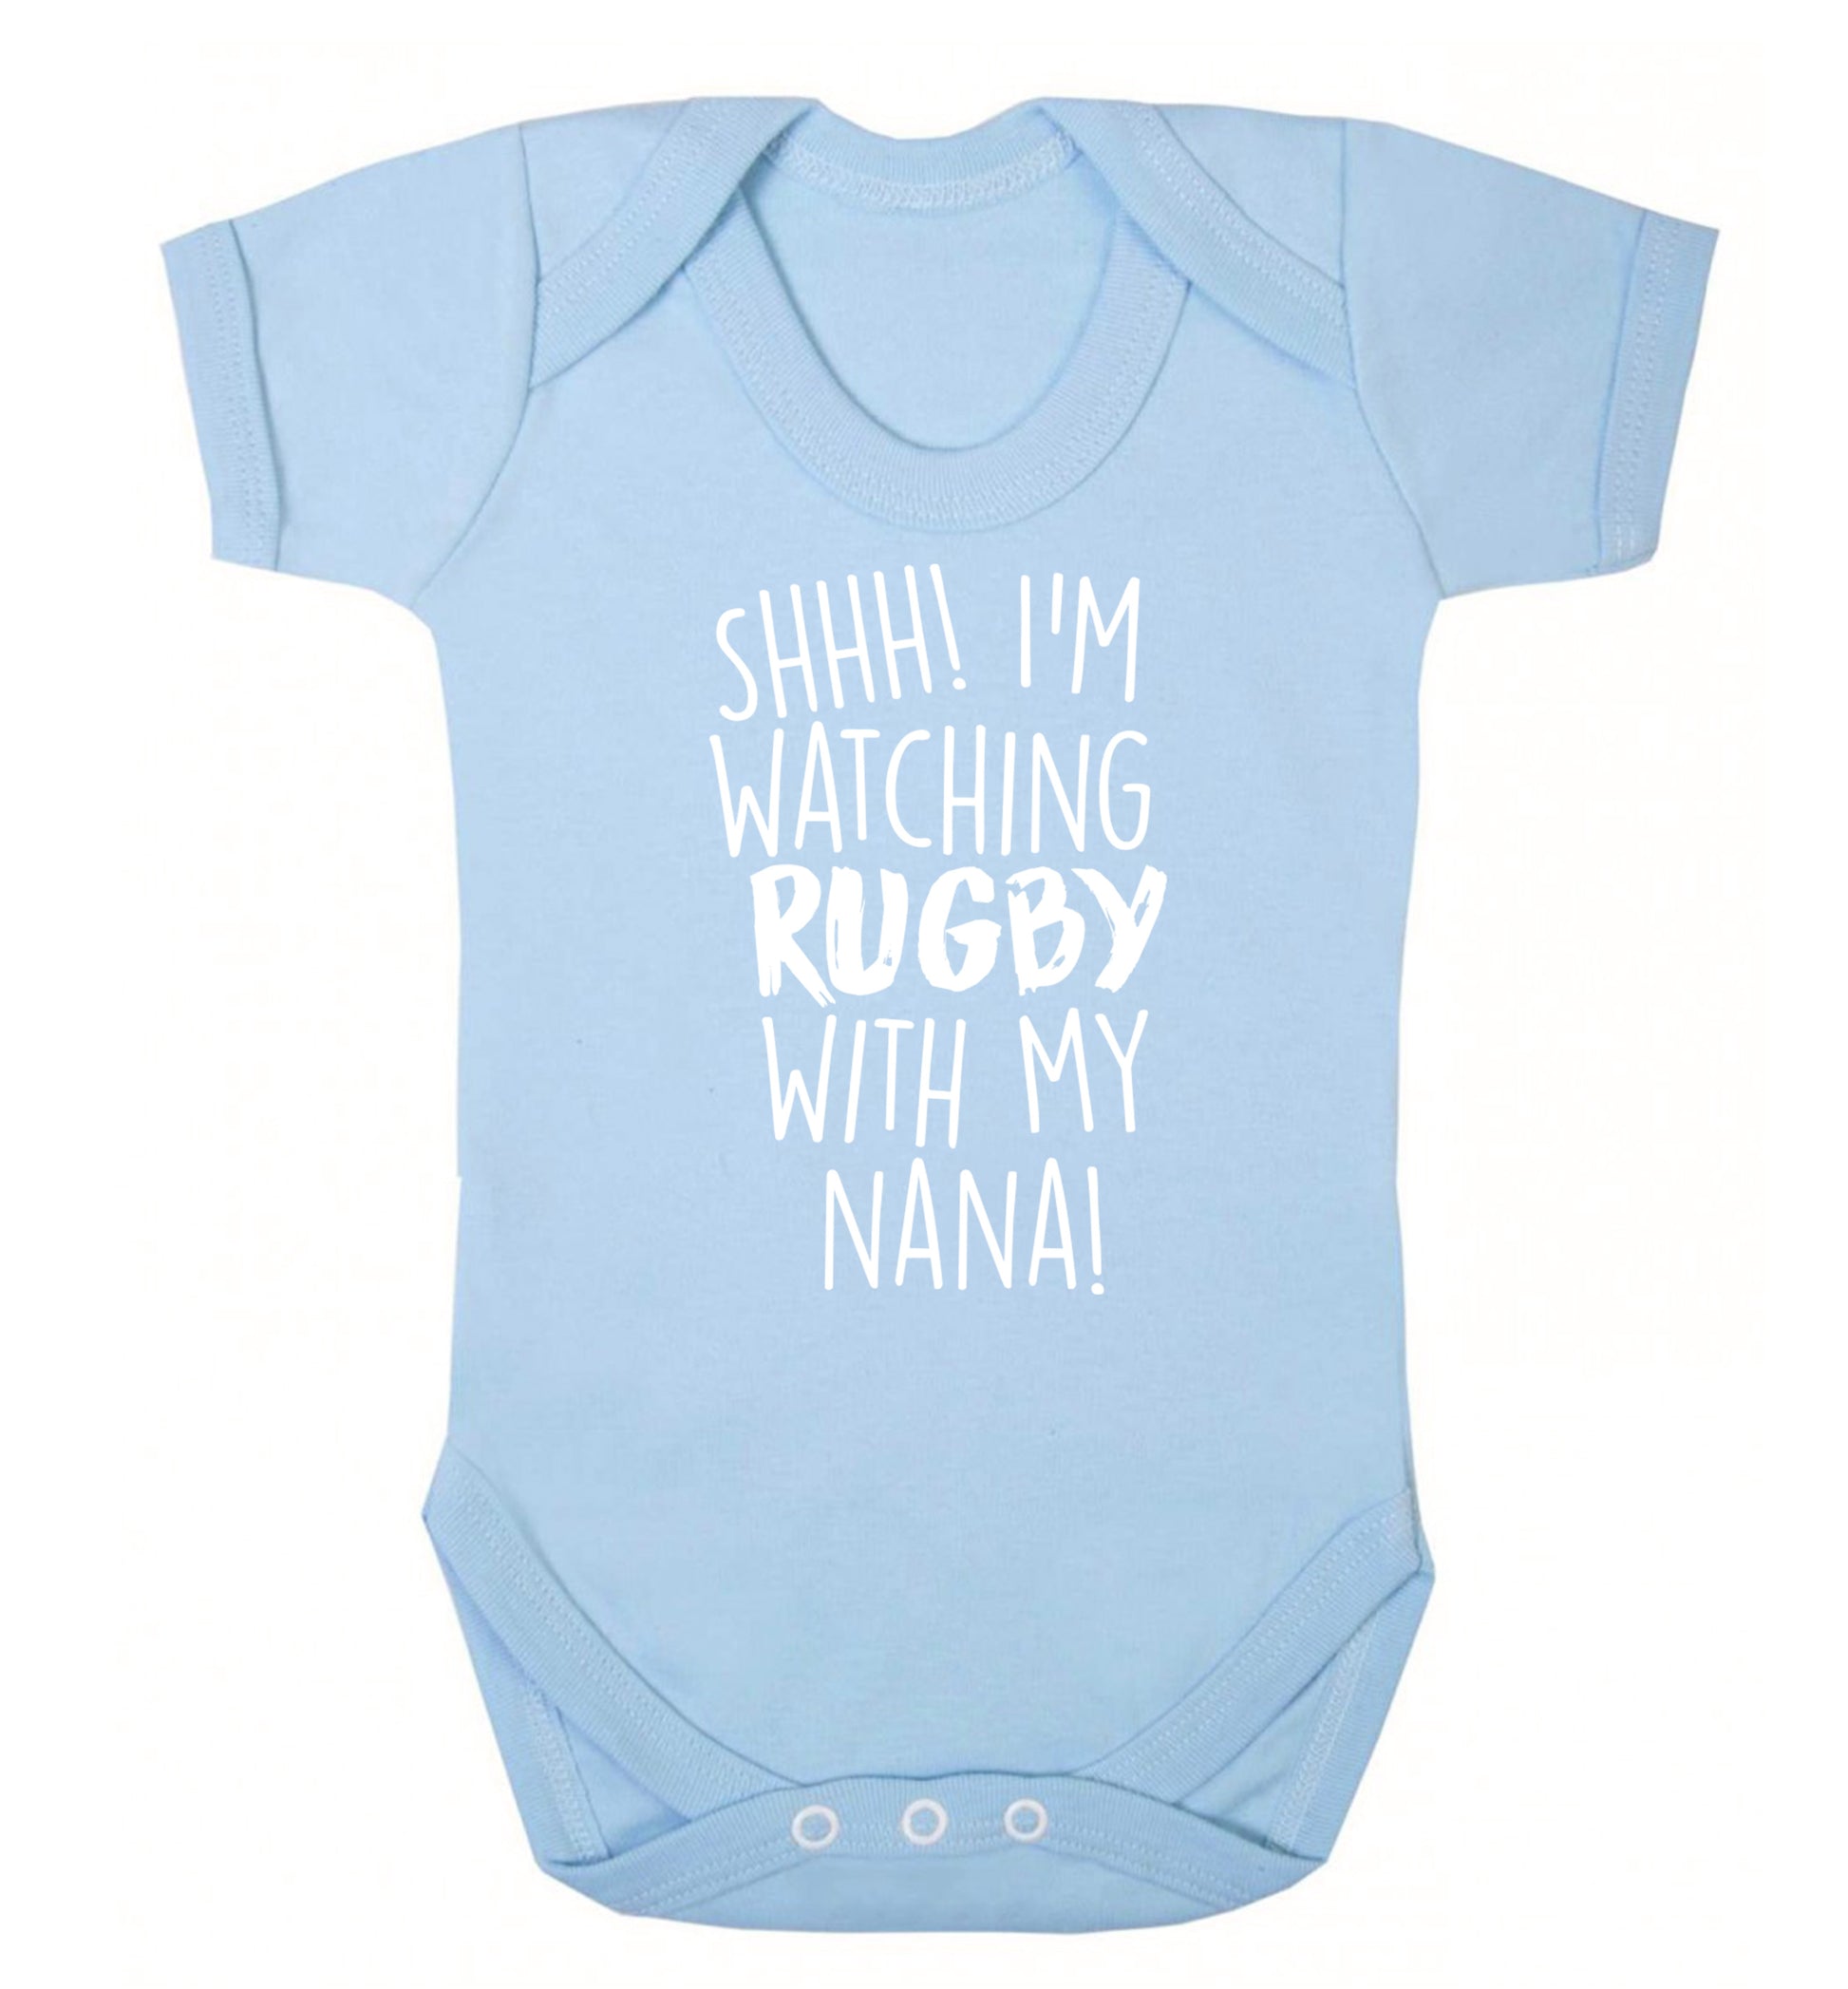 Shh I'm watching rugby with my nana Baby Vest pale blue 18-24 months